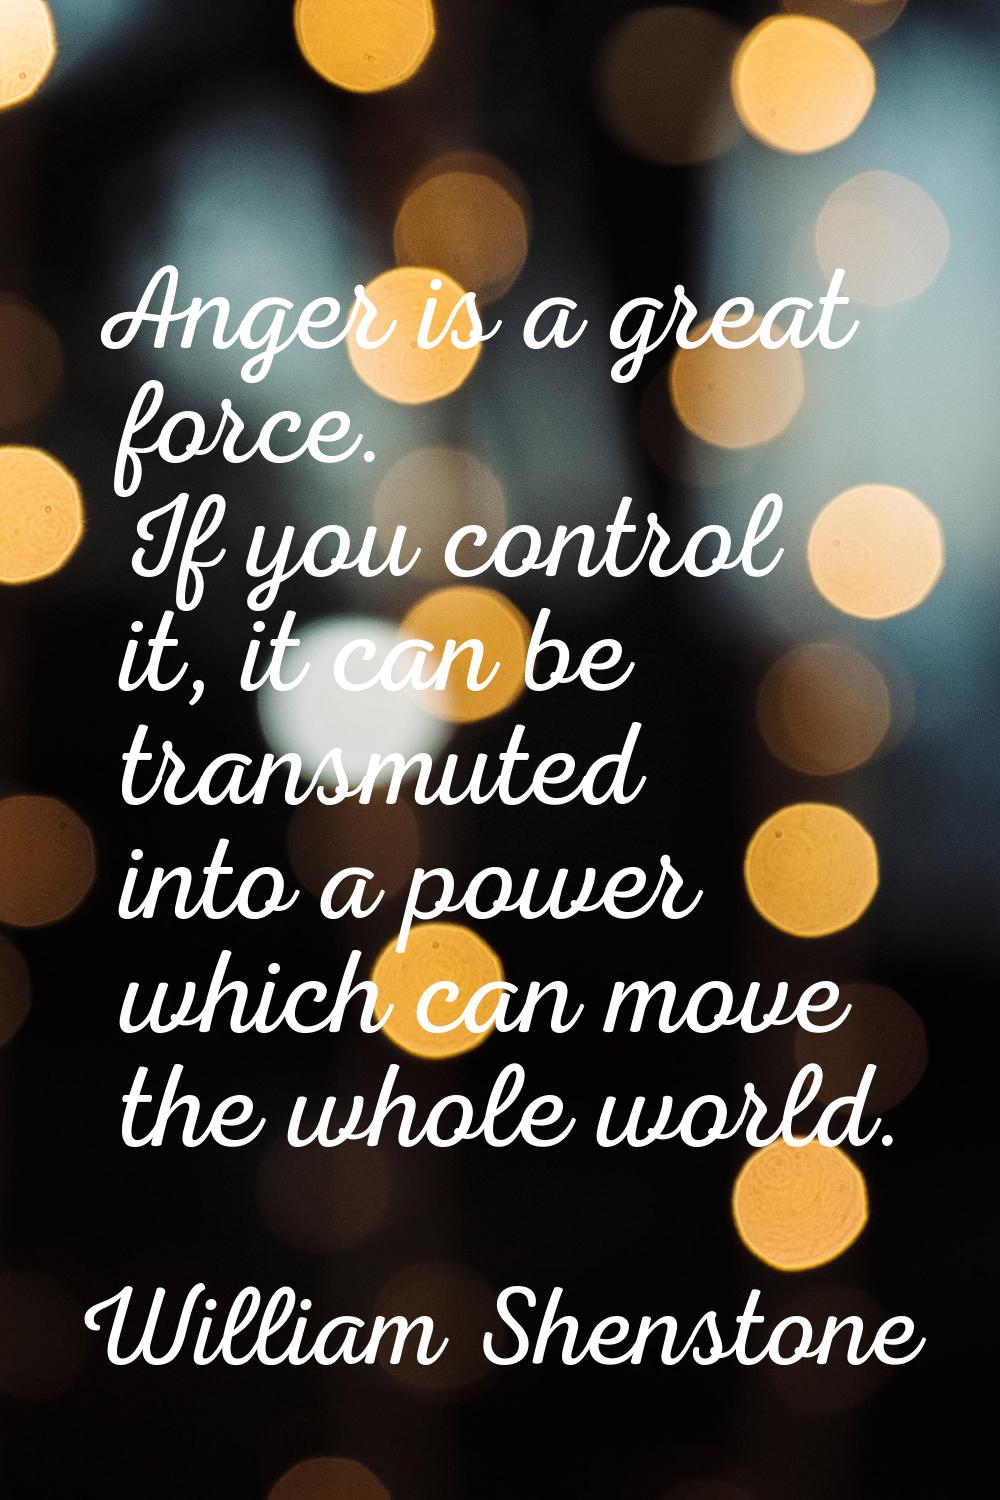 Anger is a great force. If you control it, it can be transmuted into a power which can move the who